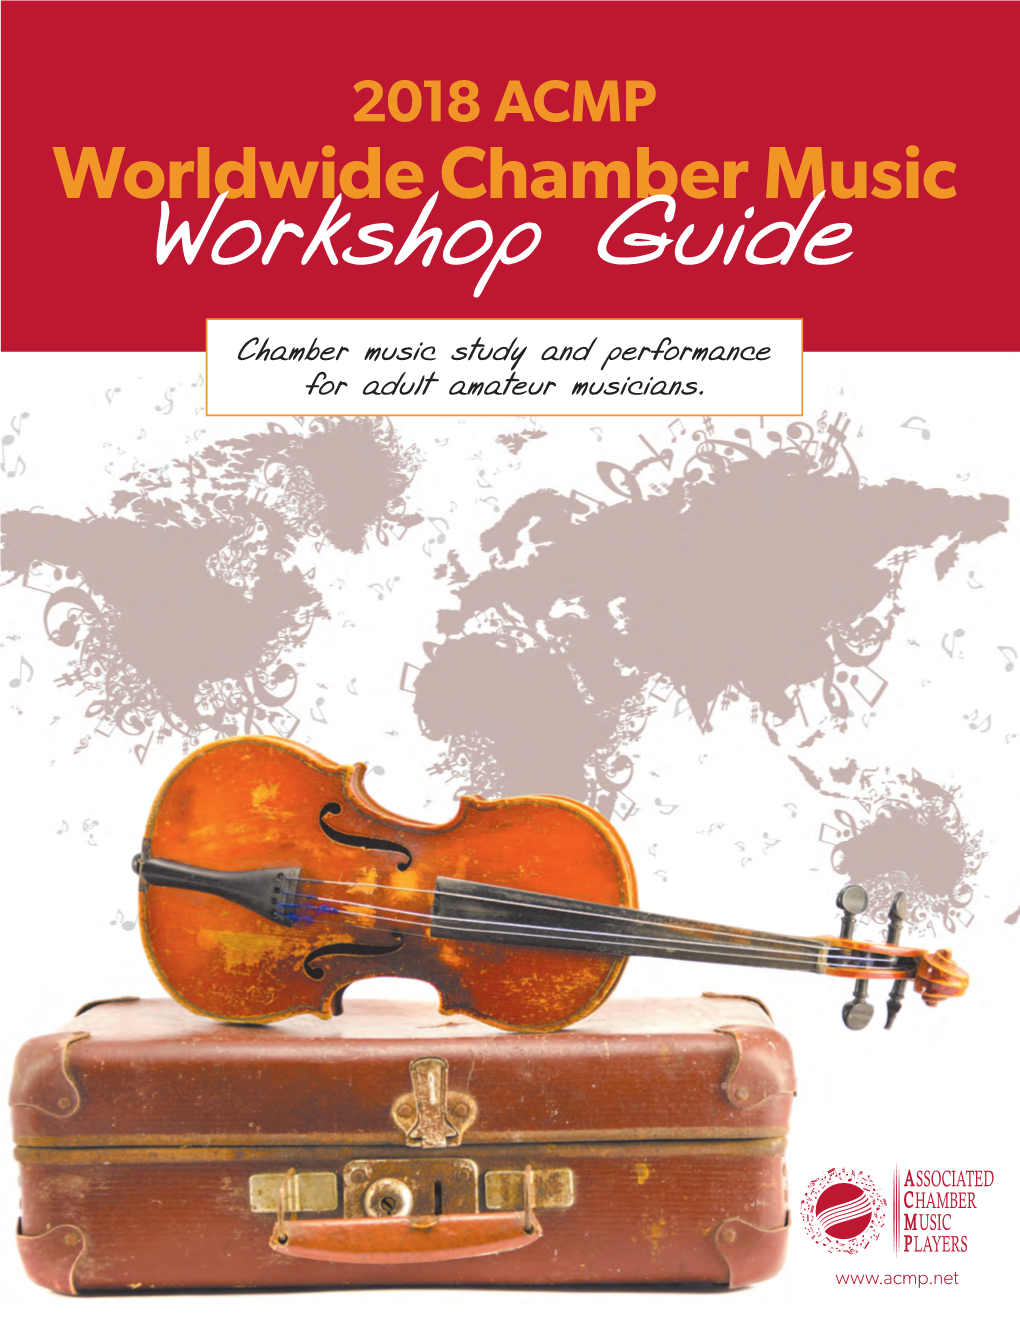 Chamber Music Study and Performance for Adult Amateur Musicians